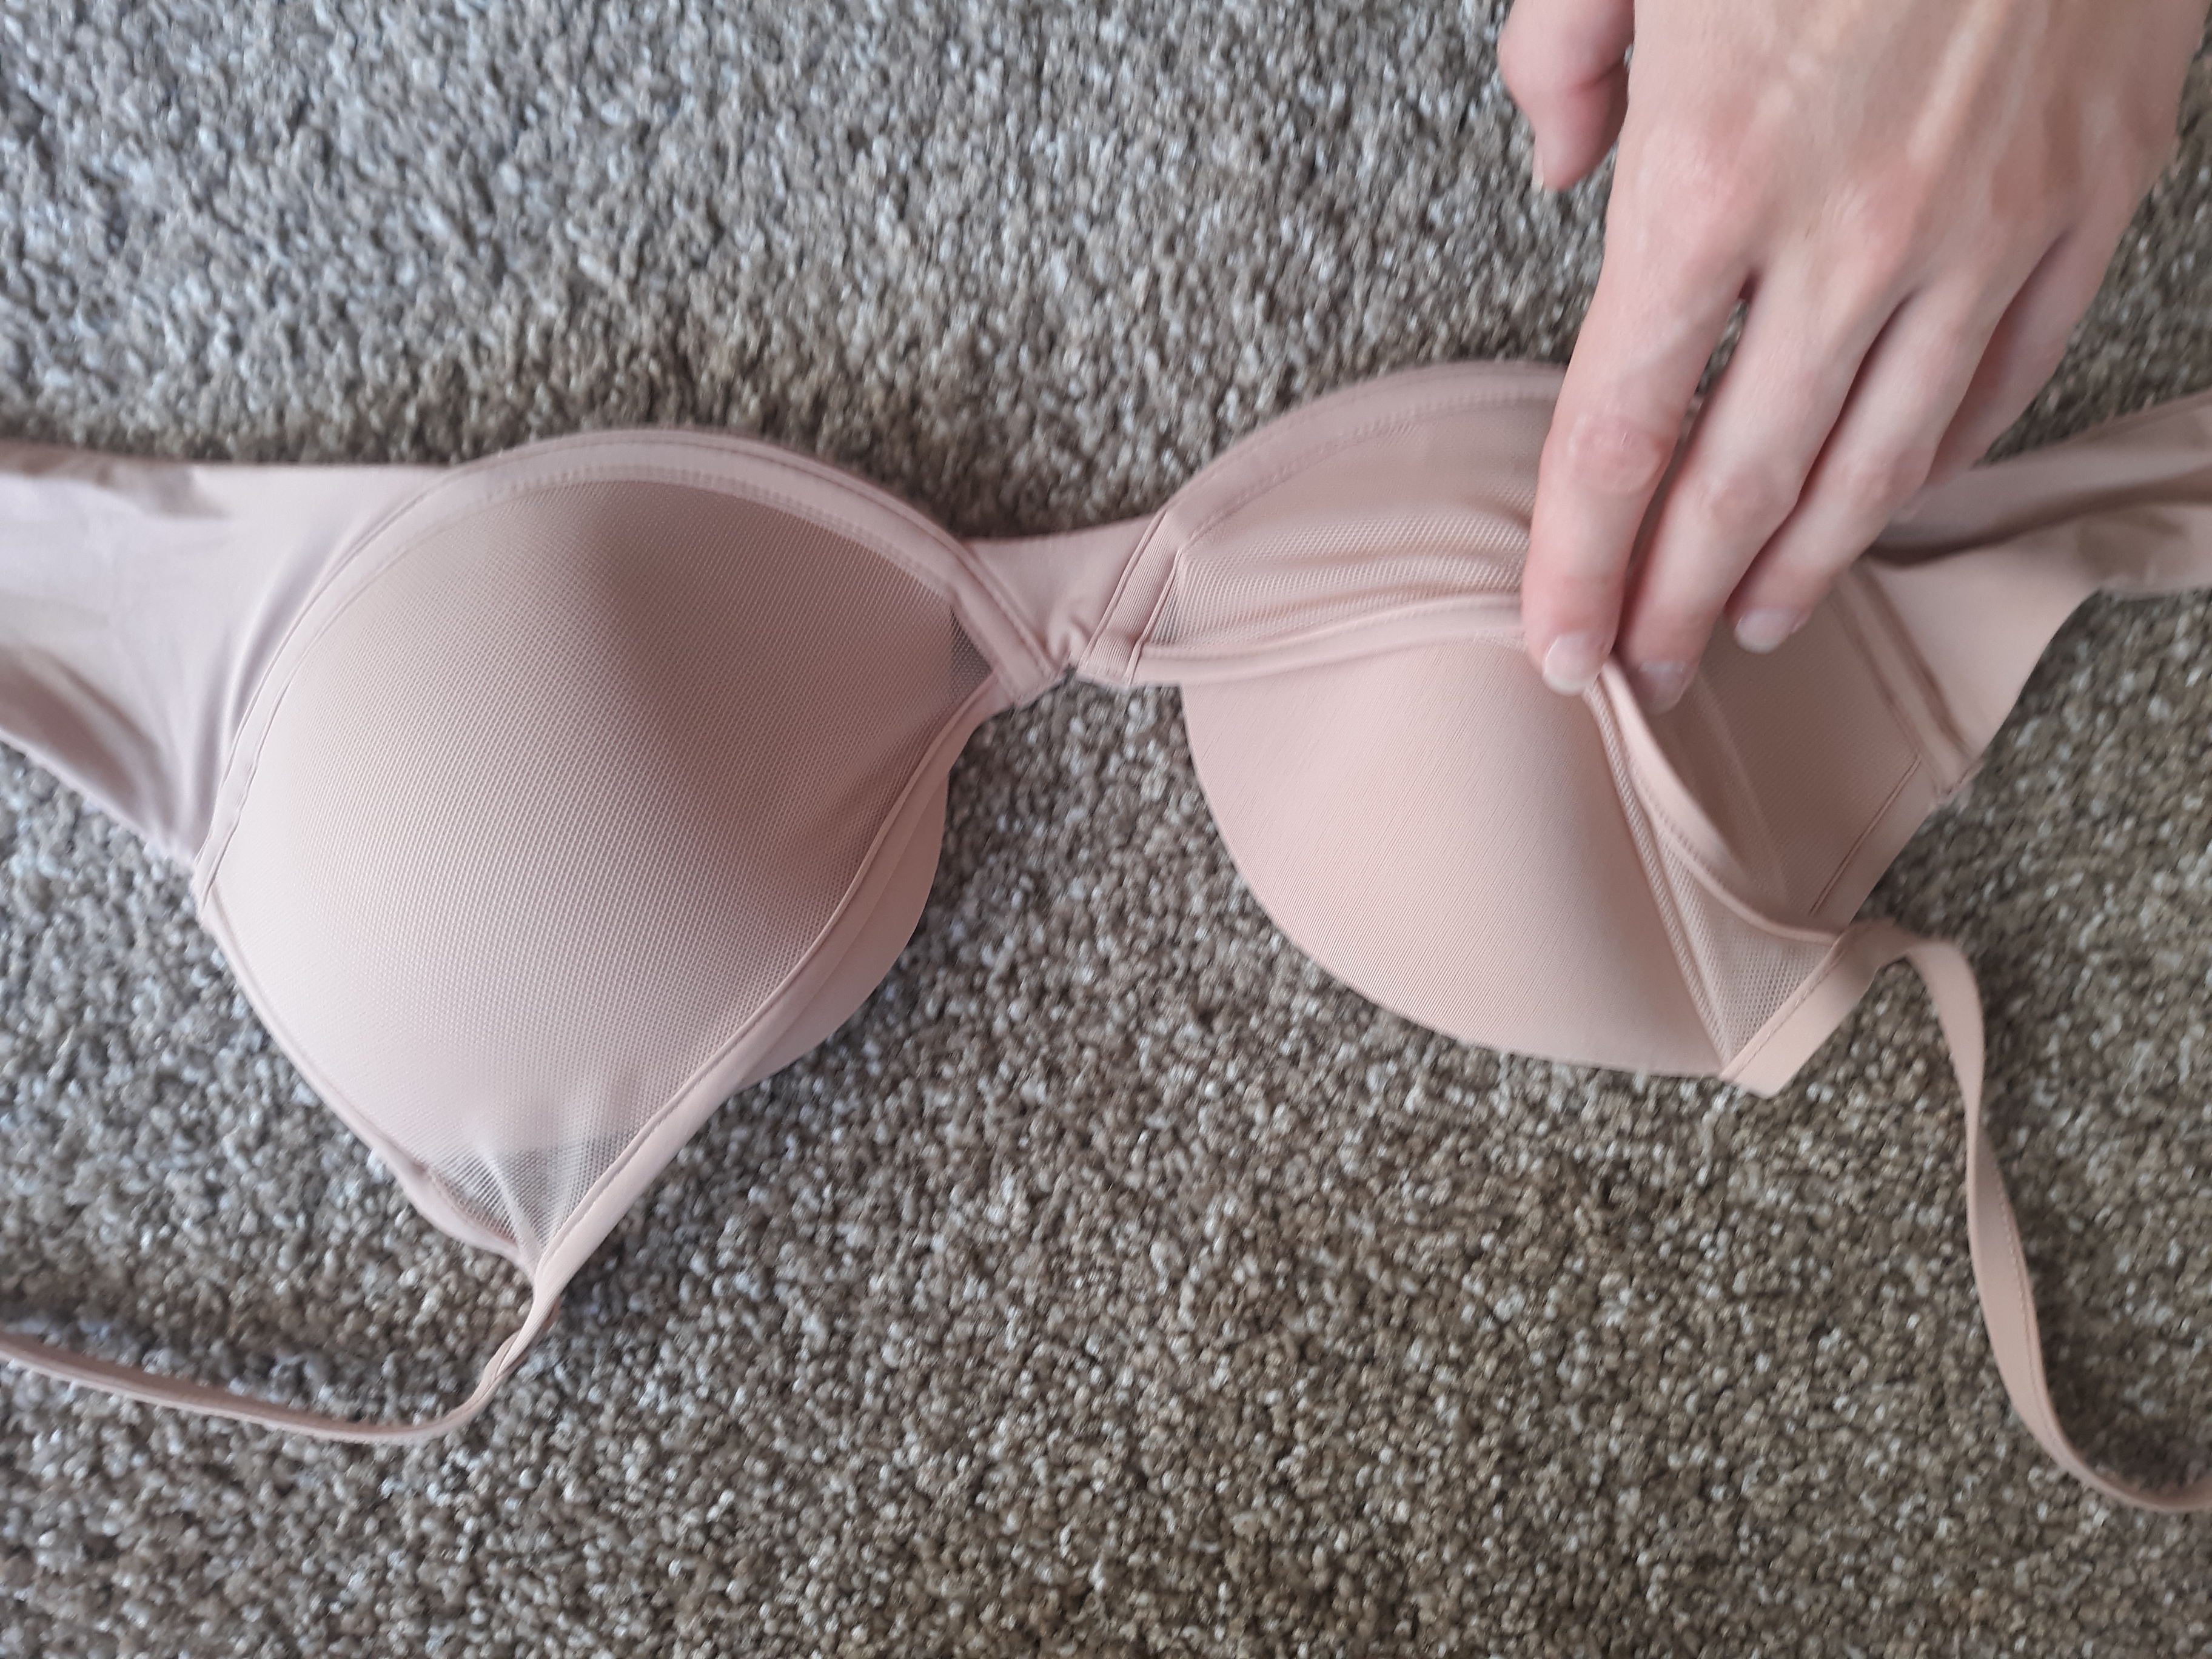 Pepper Bra Review and My Experience Growing Up Small Chested